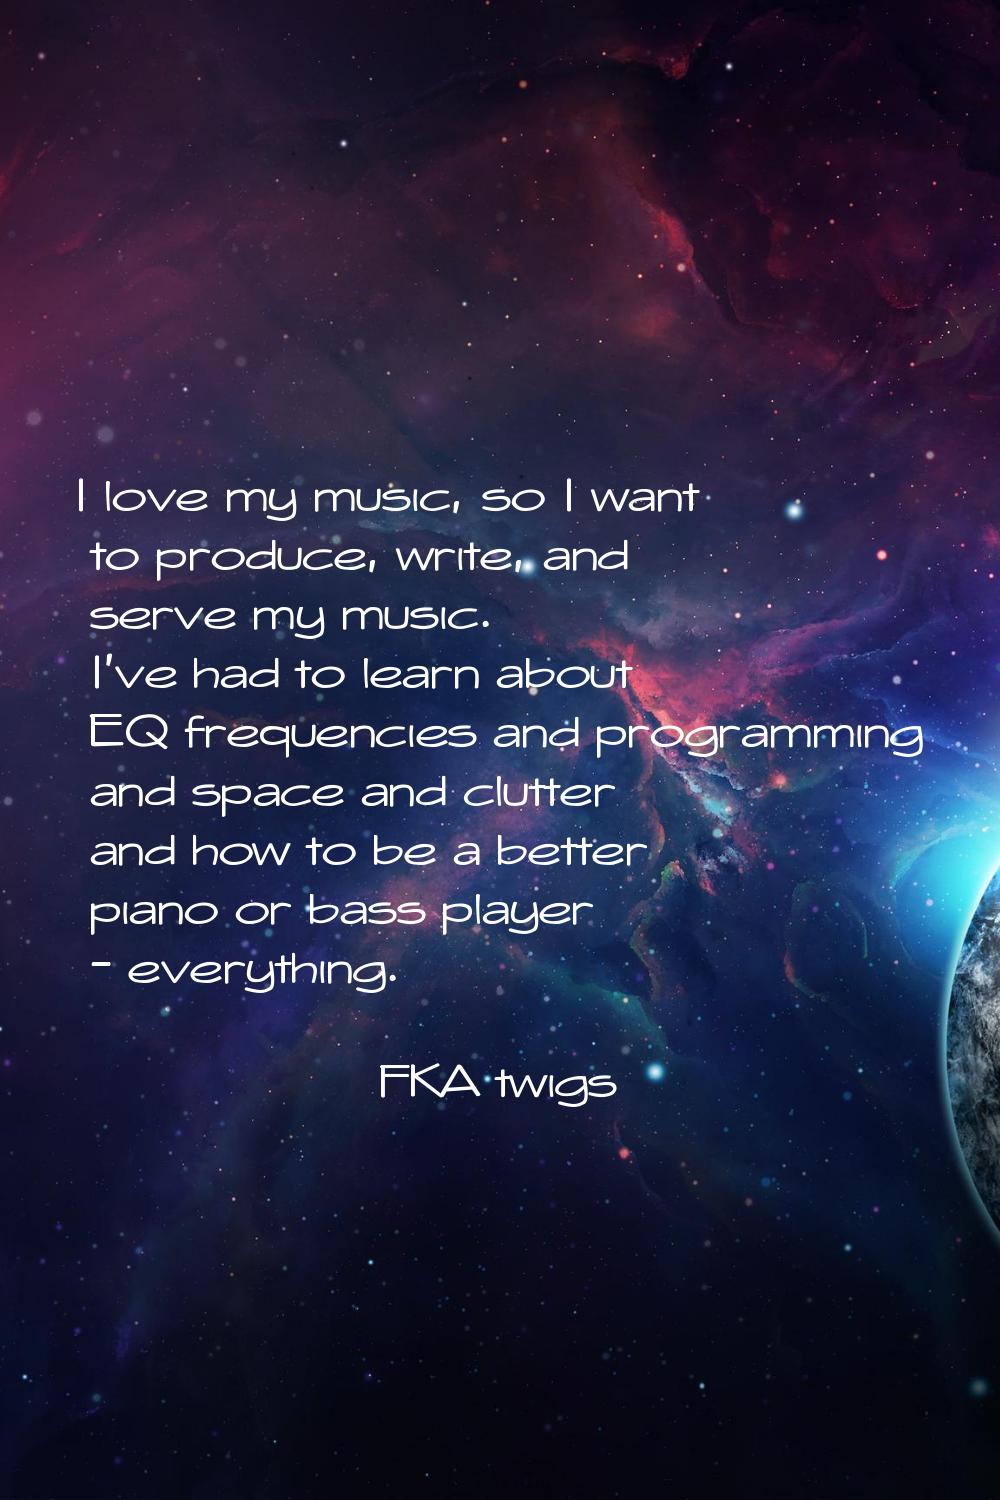 I love my music, so I want to produce, write, and serve my music. I've had to learn about EQ freque